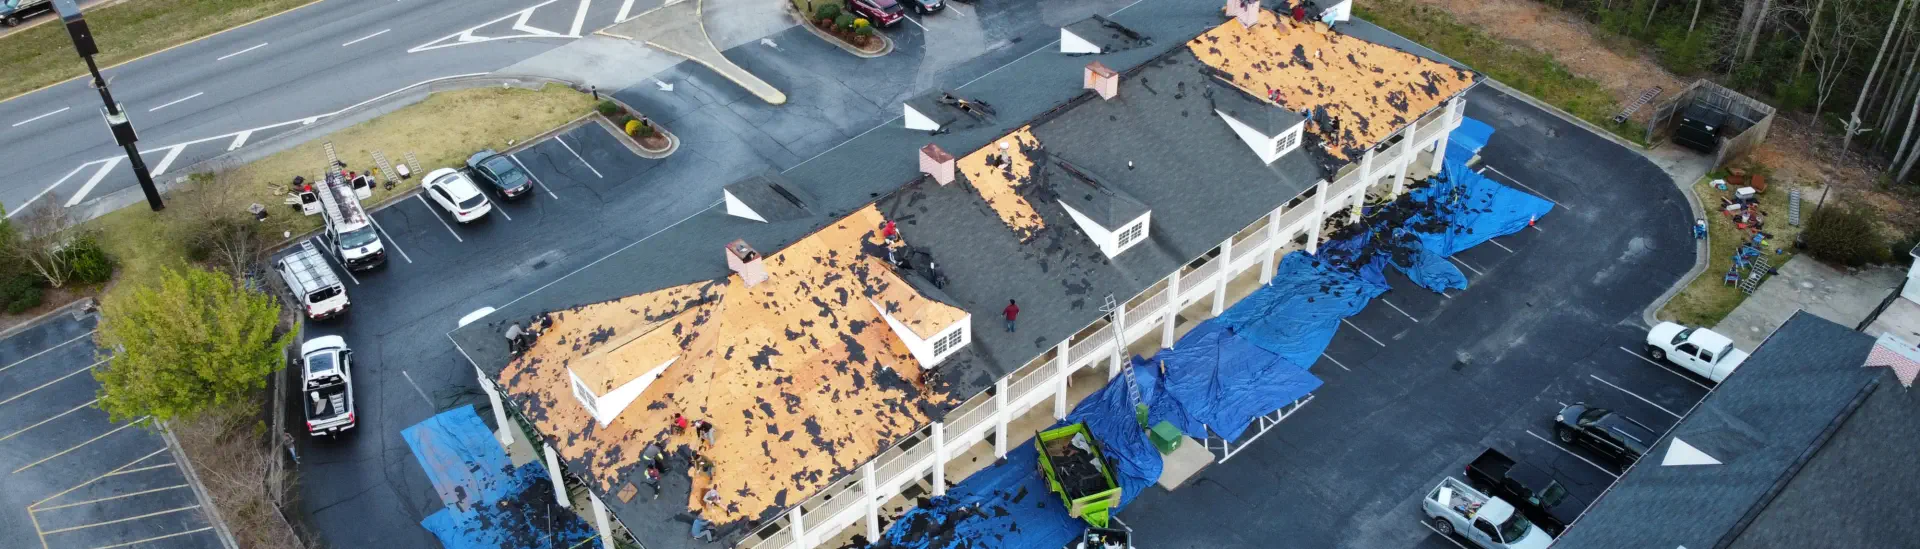 Commercial Roofing - Quality Inn Roofing Overhaul by Xtreme Xteriors